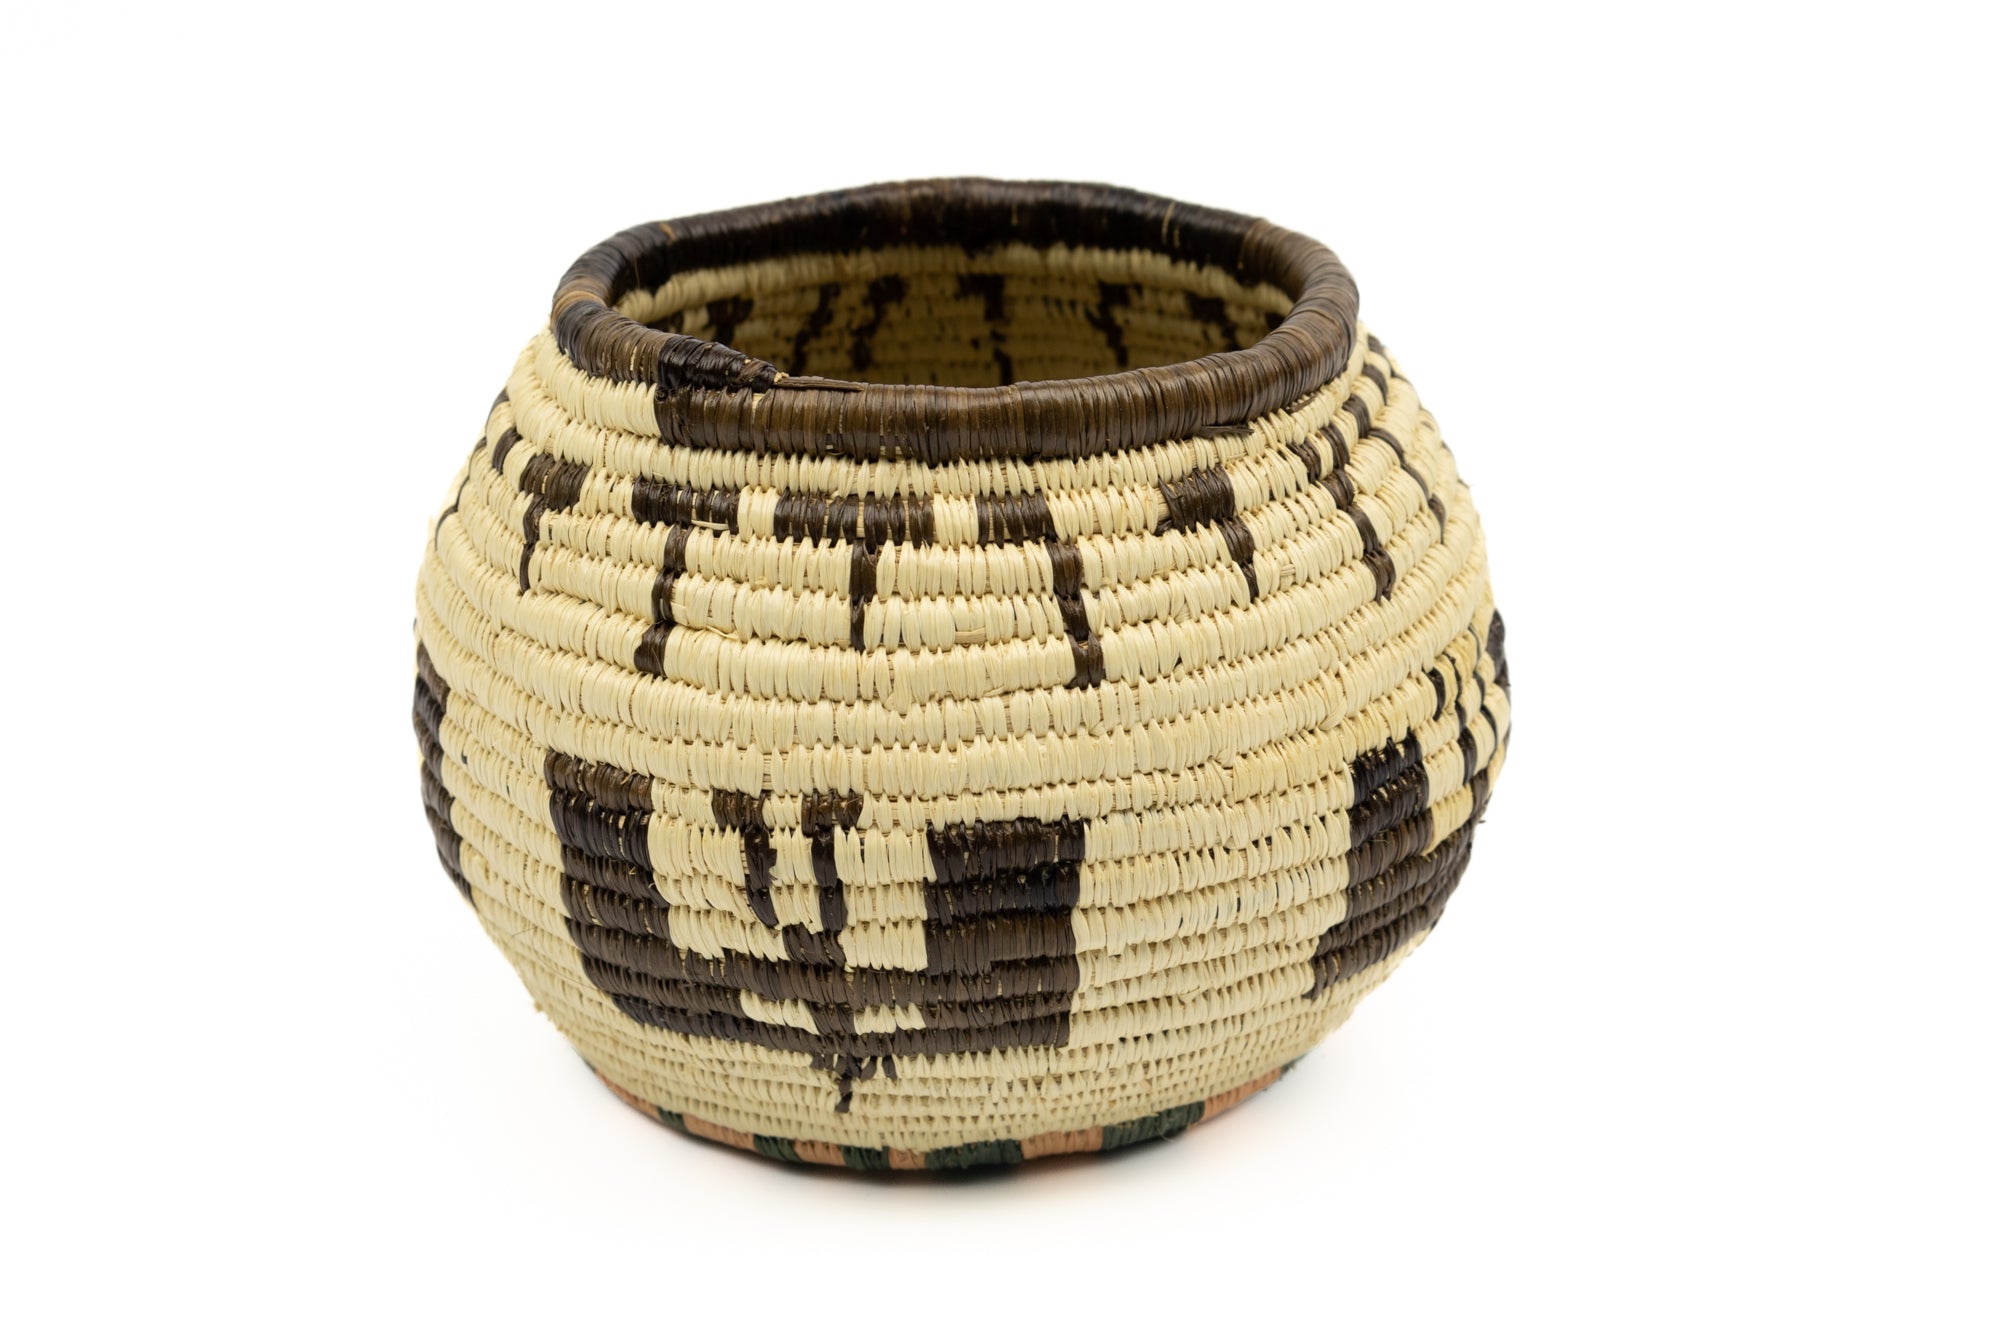 Hand Woven Vintage Butterfly Basket Made By Indigenous Artisans